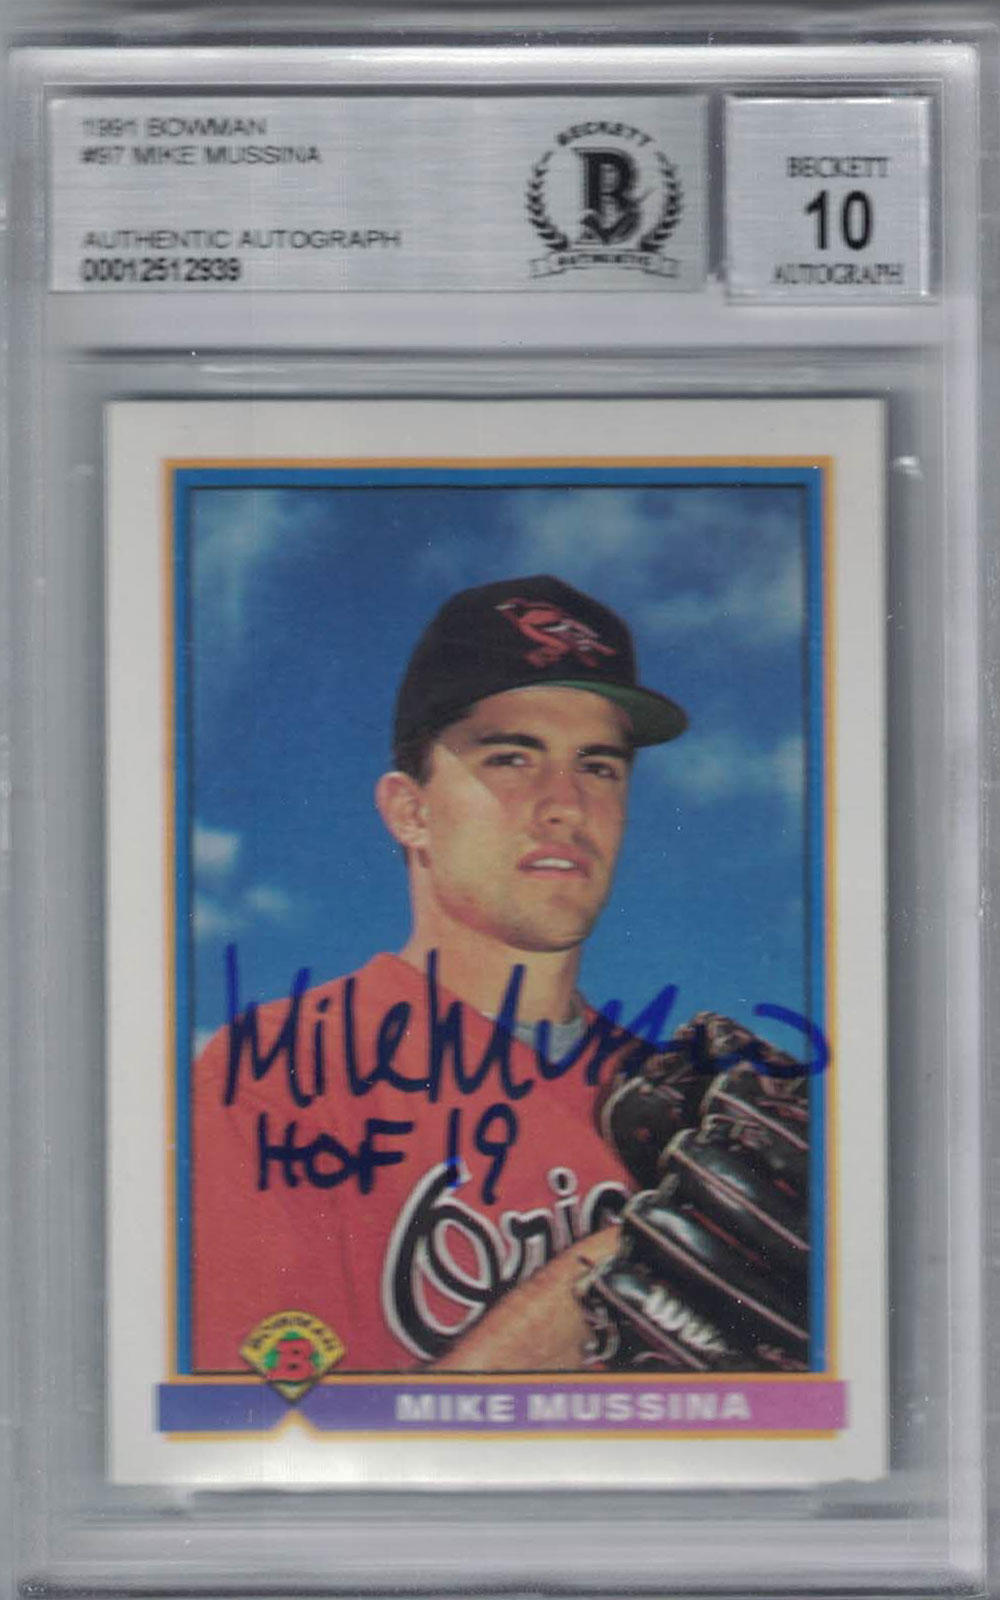 Mike Mussina Signed Baltimore Orioles 1991 Bowman Trading Card BAS 10 29576